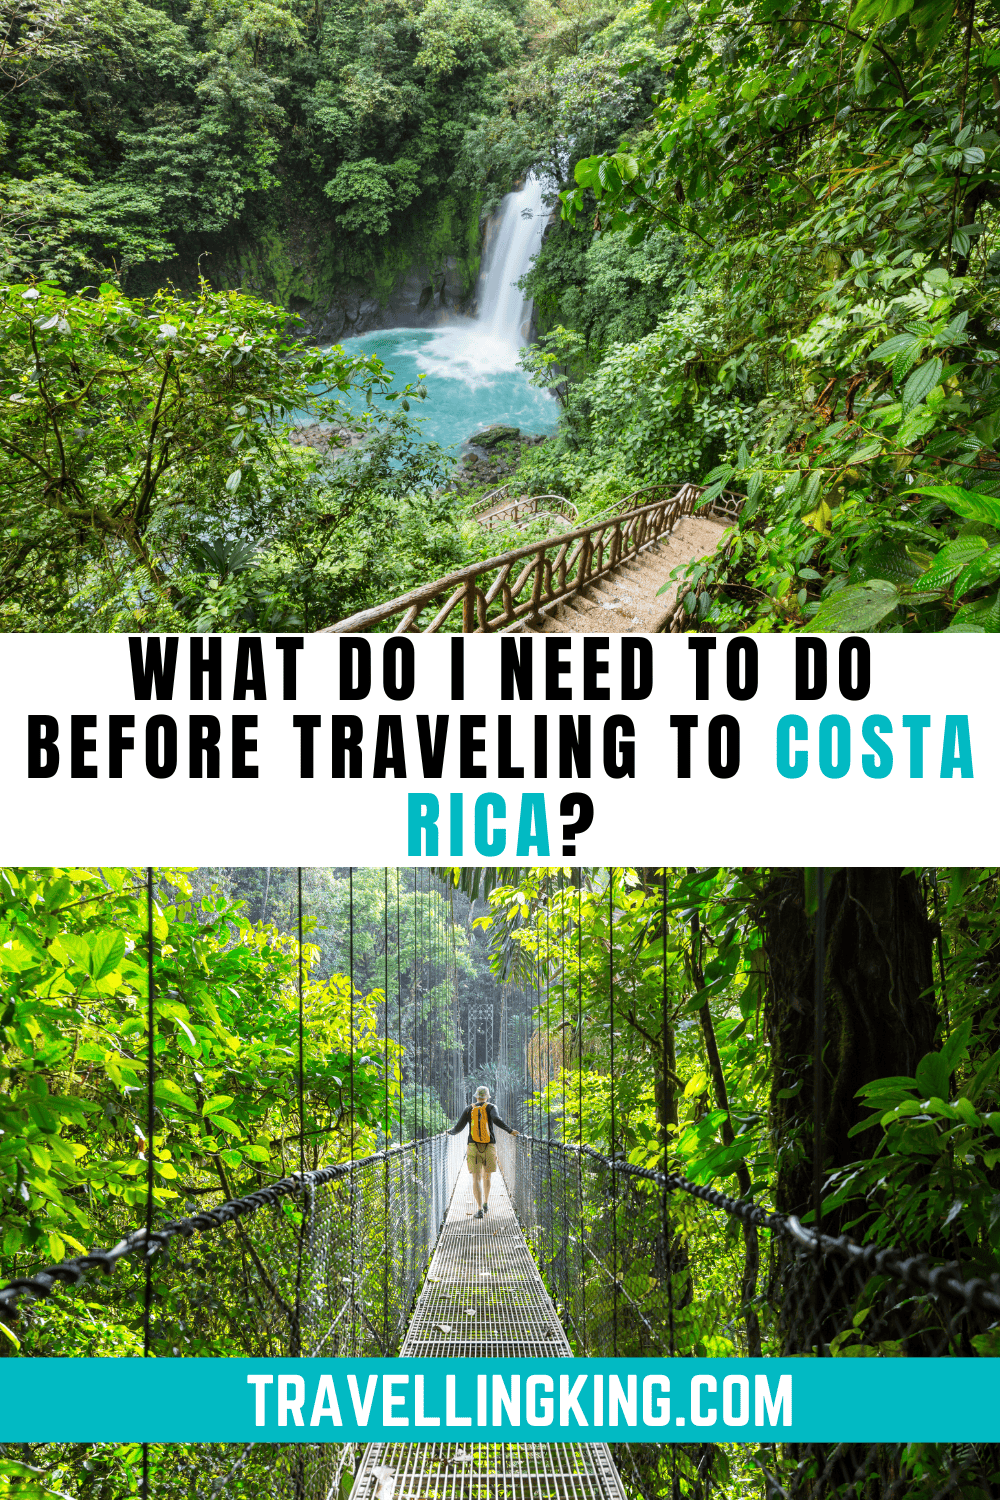 What Do I Need to Do Before Traveling to Costa Rica?